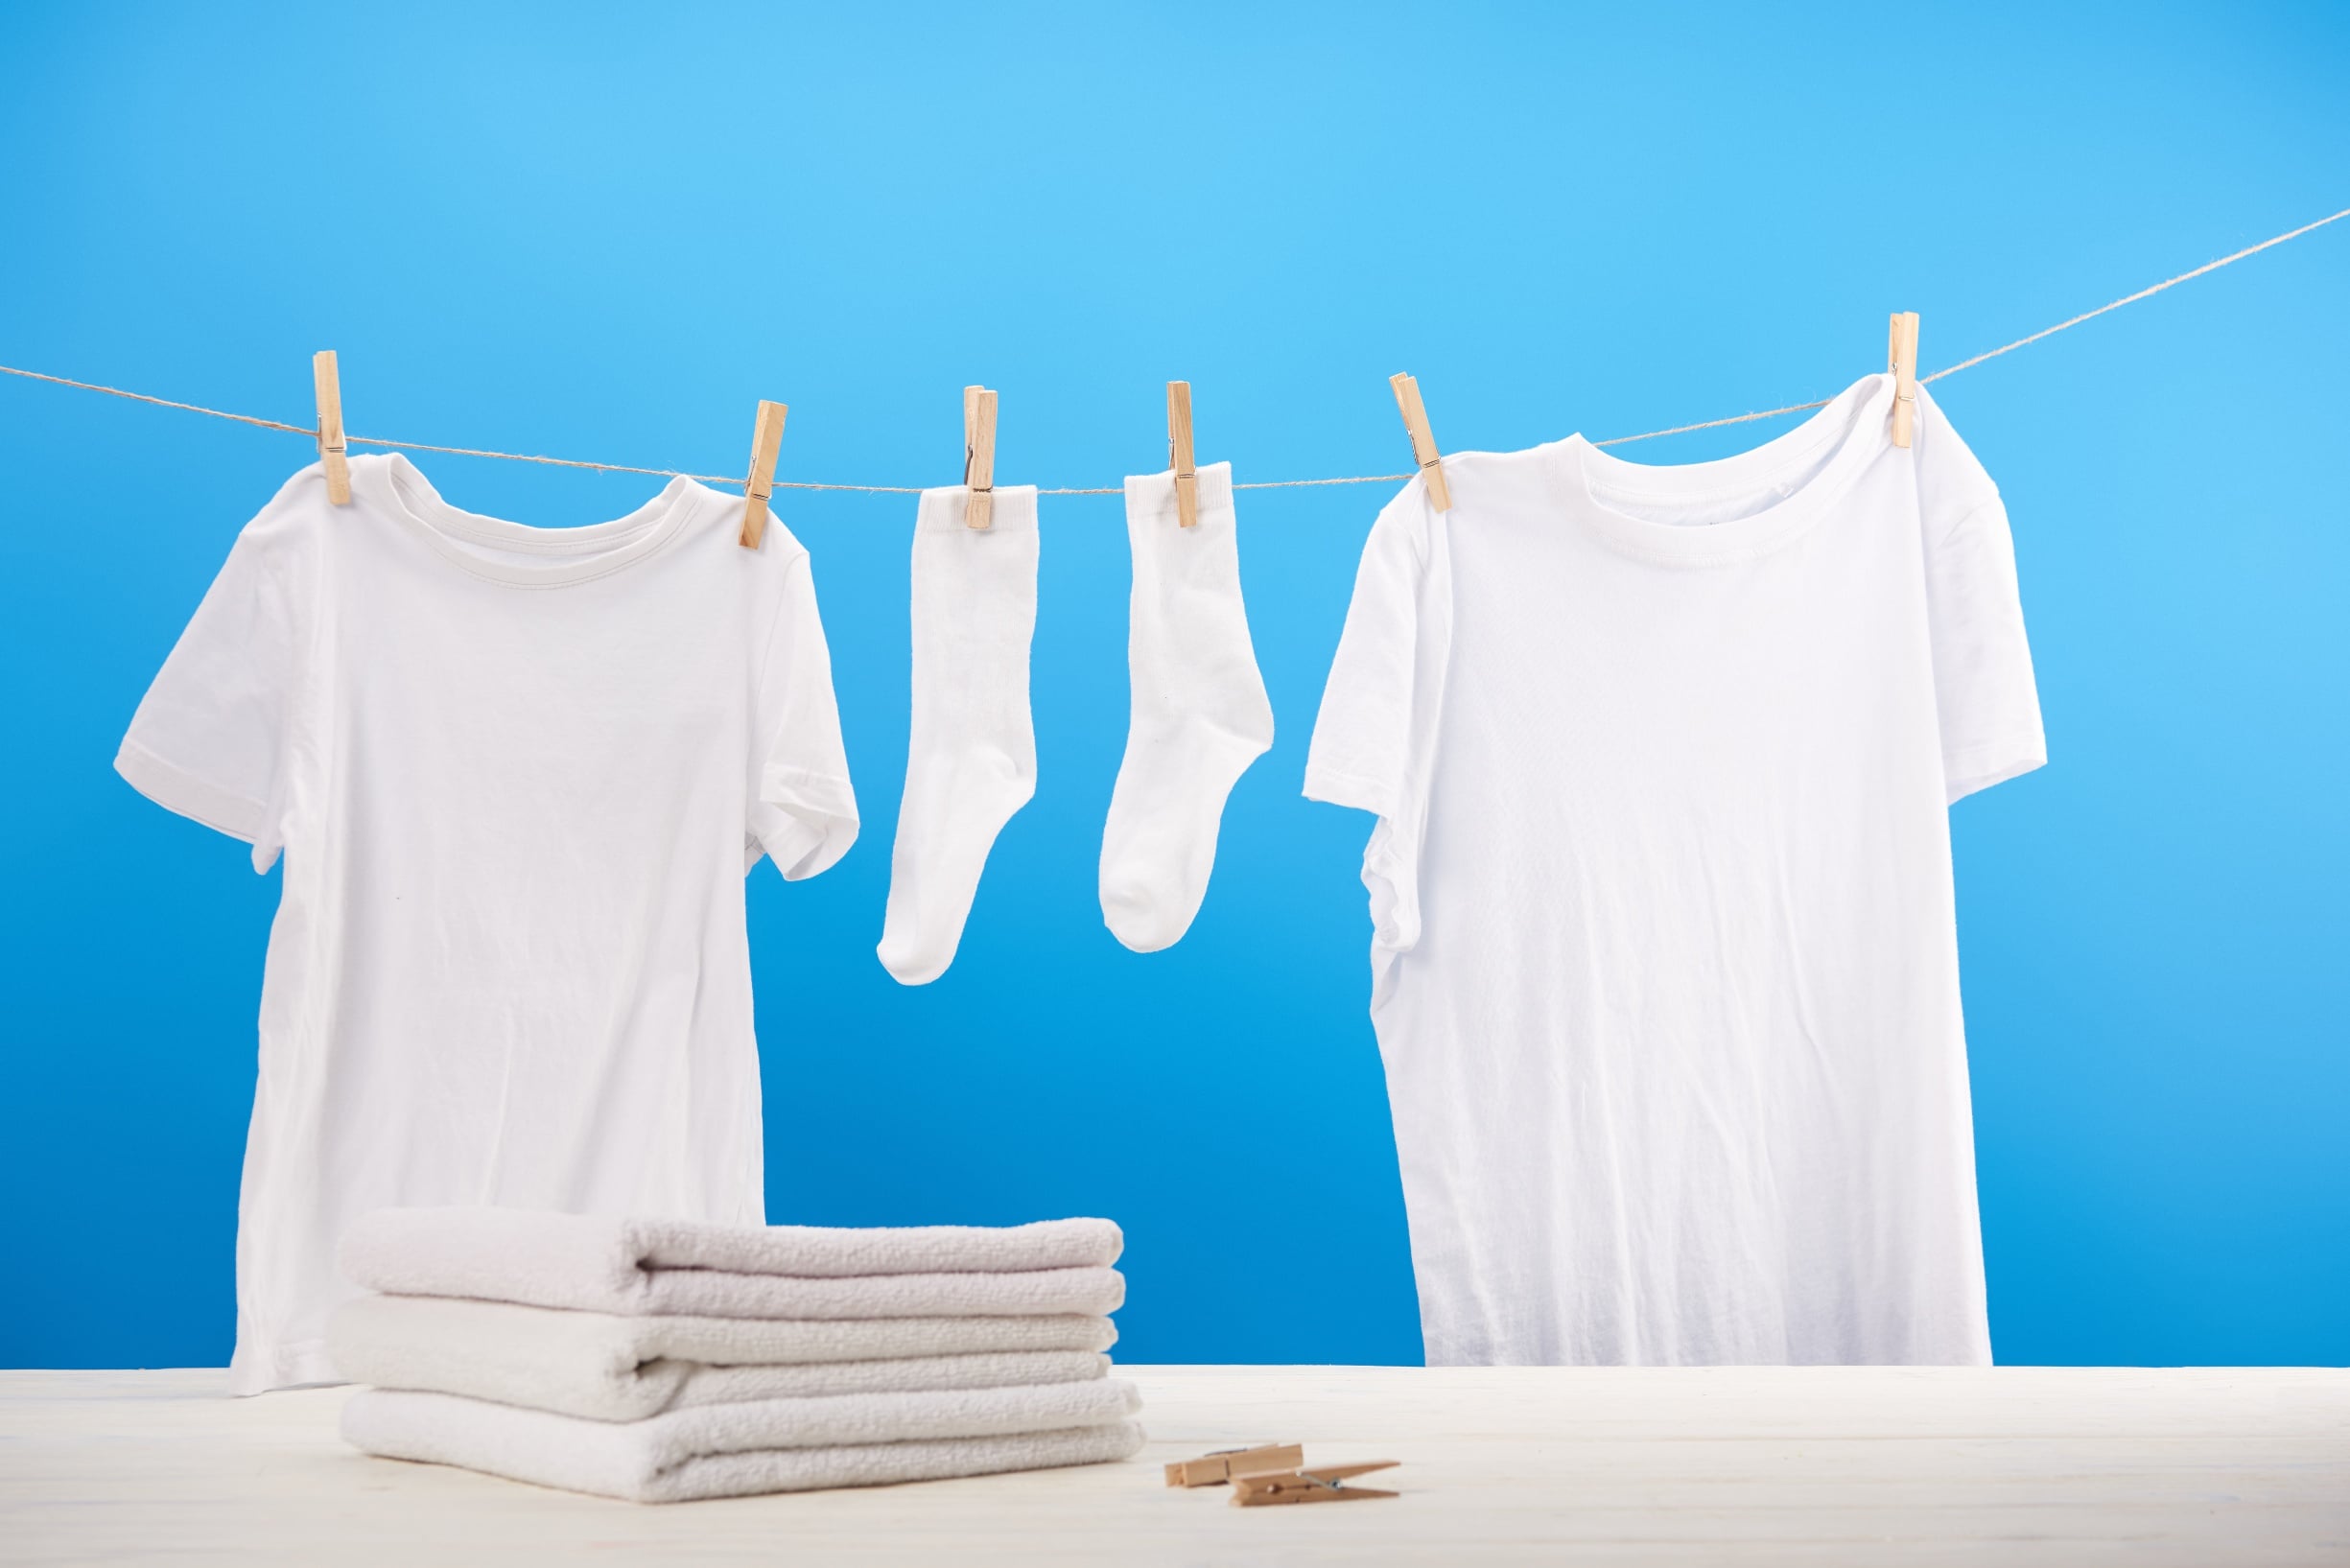 What Do I Do If My White Clothes Turned Gray in Wash? - Synonym